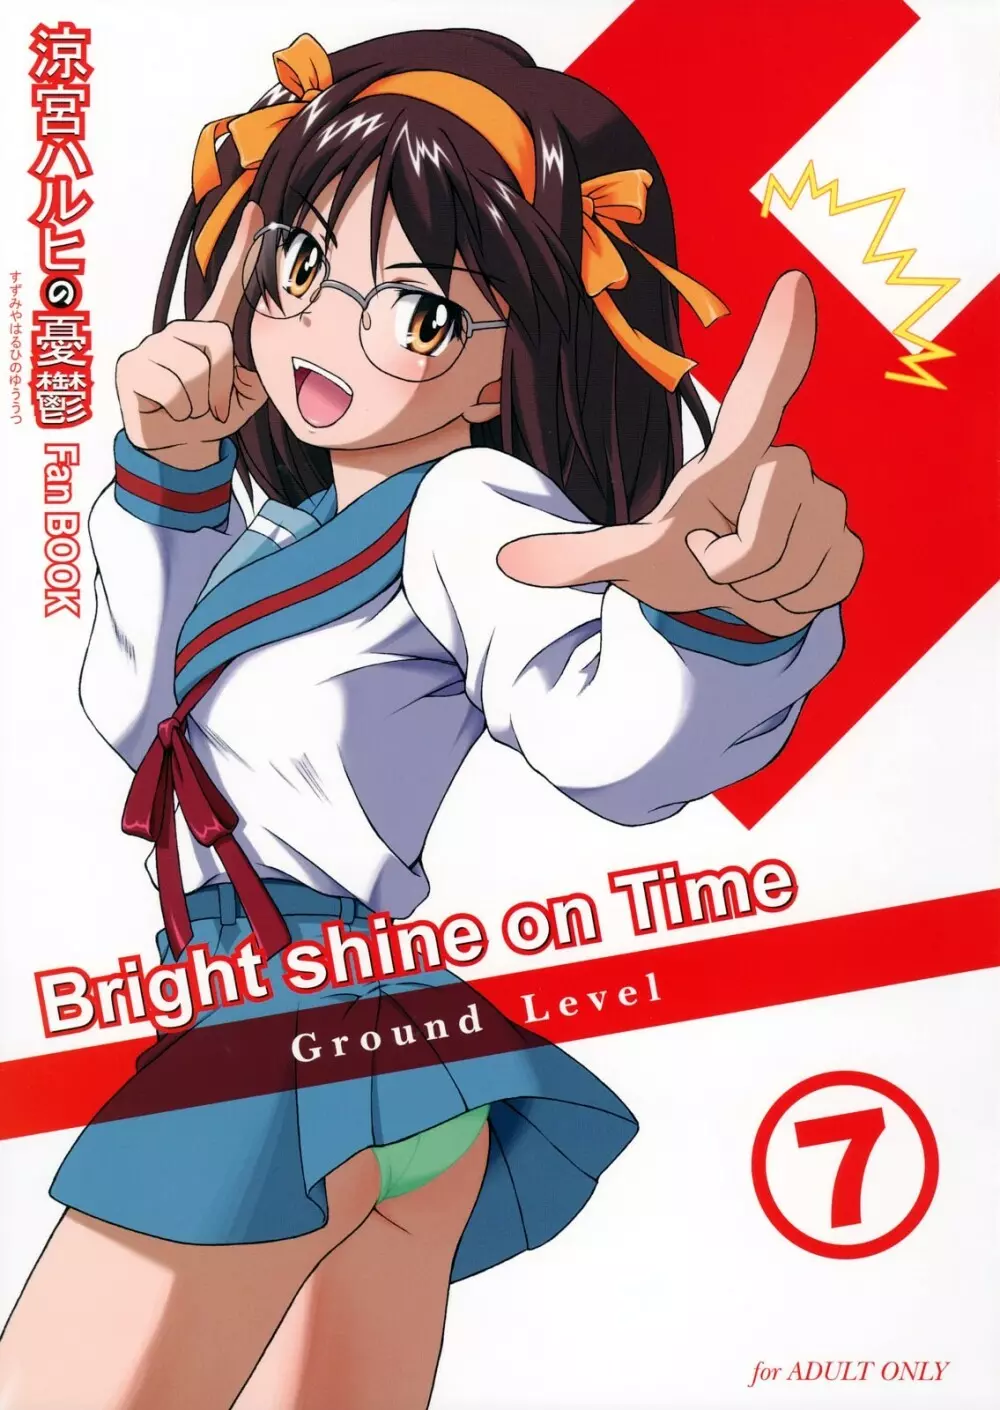 Bright shine on Time 7